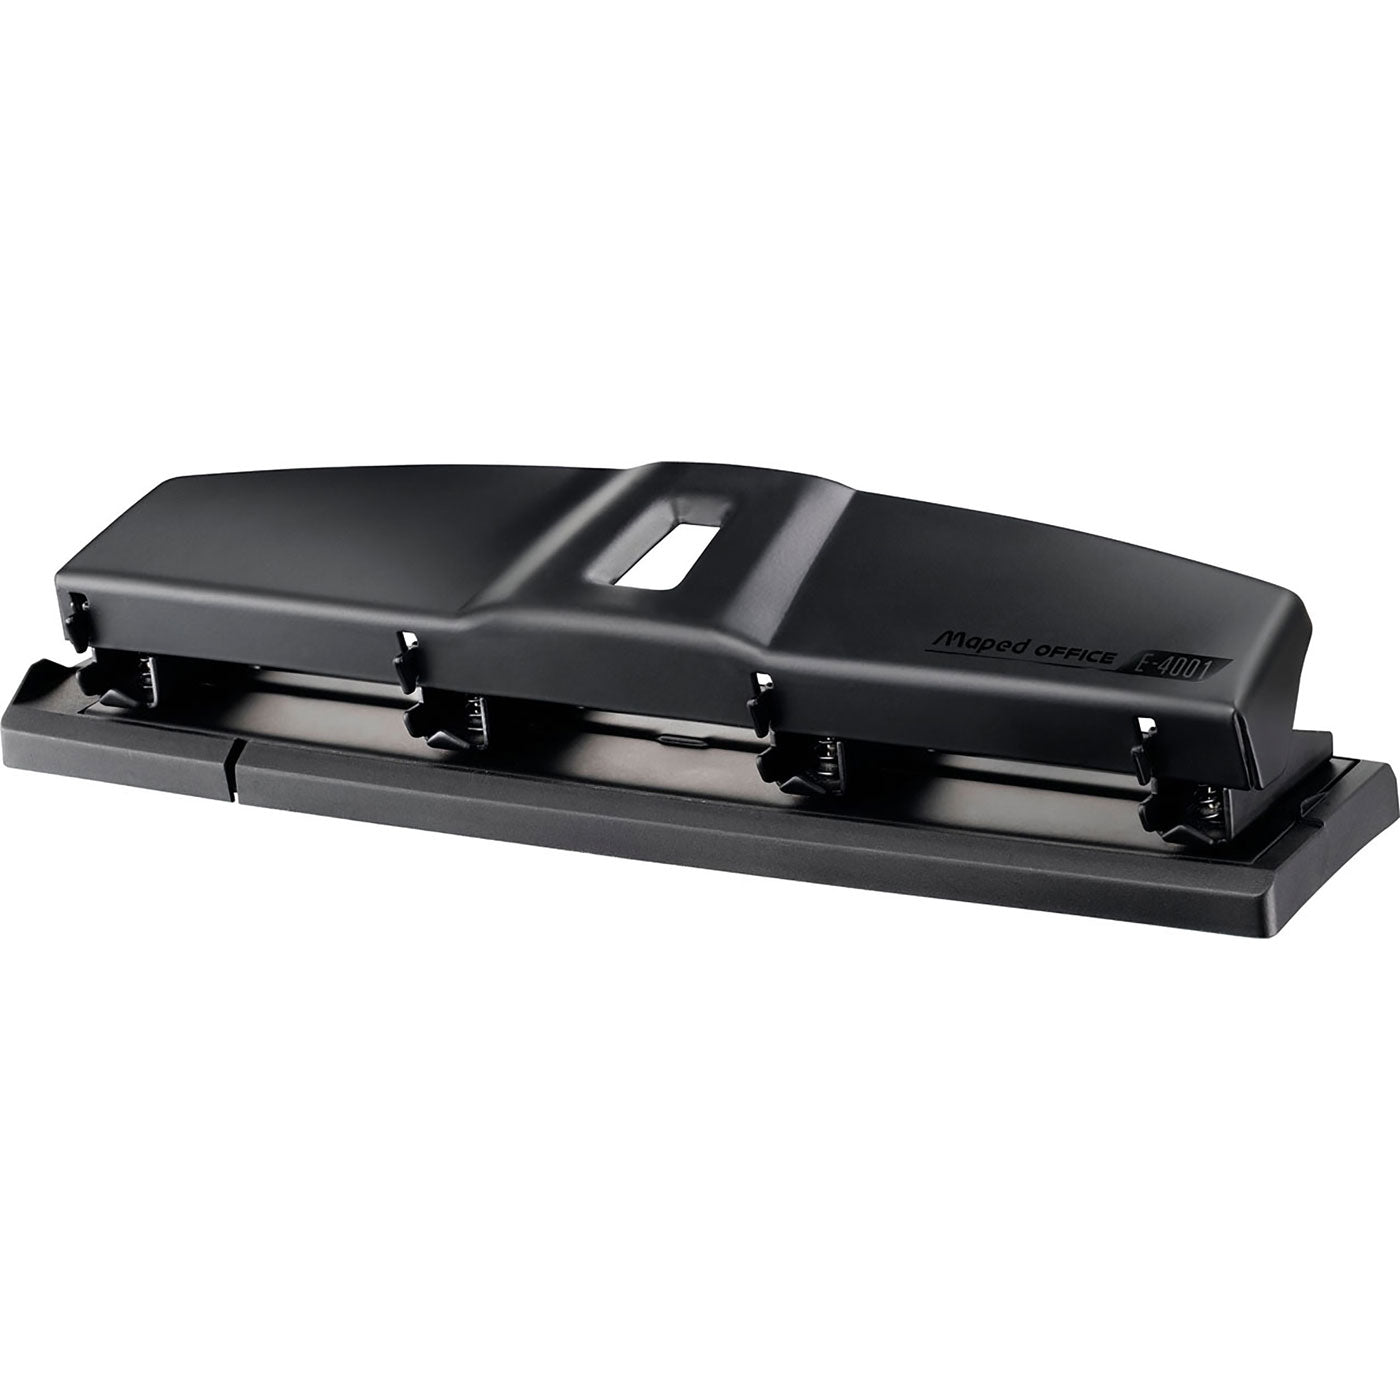 Maped Essential 4 Hole Punch - 15 Sheet